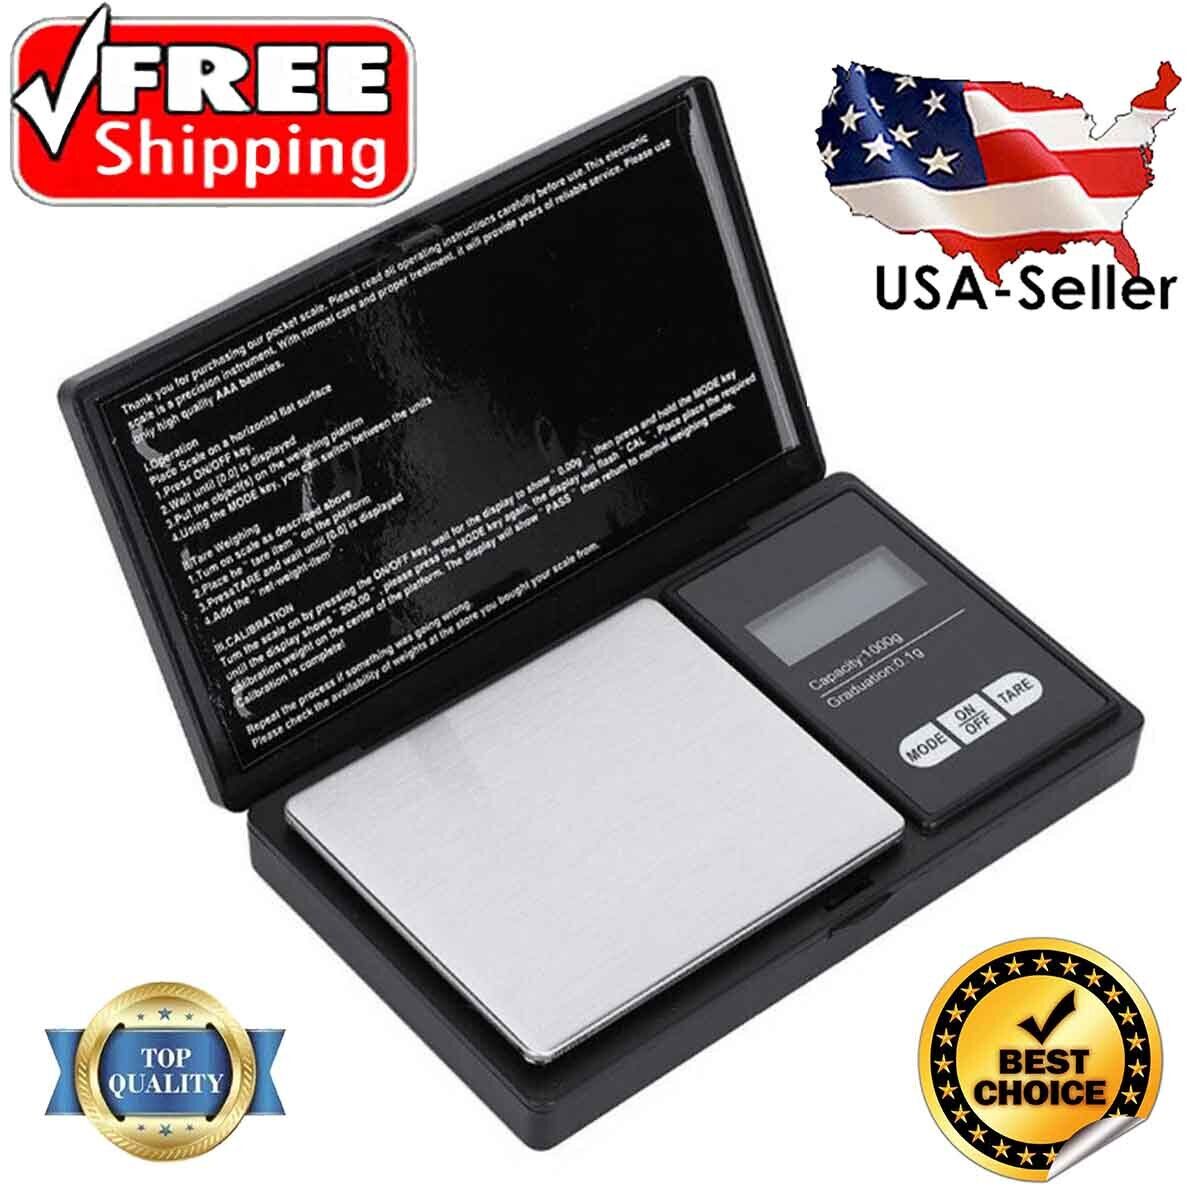 Digital Scale 1000g x 0.1g Jewelry Gold Silver Coin Gram Pocket Size Herb Grain